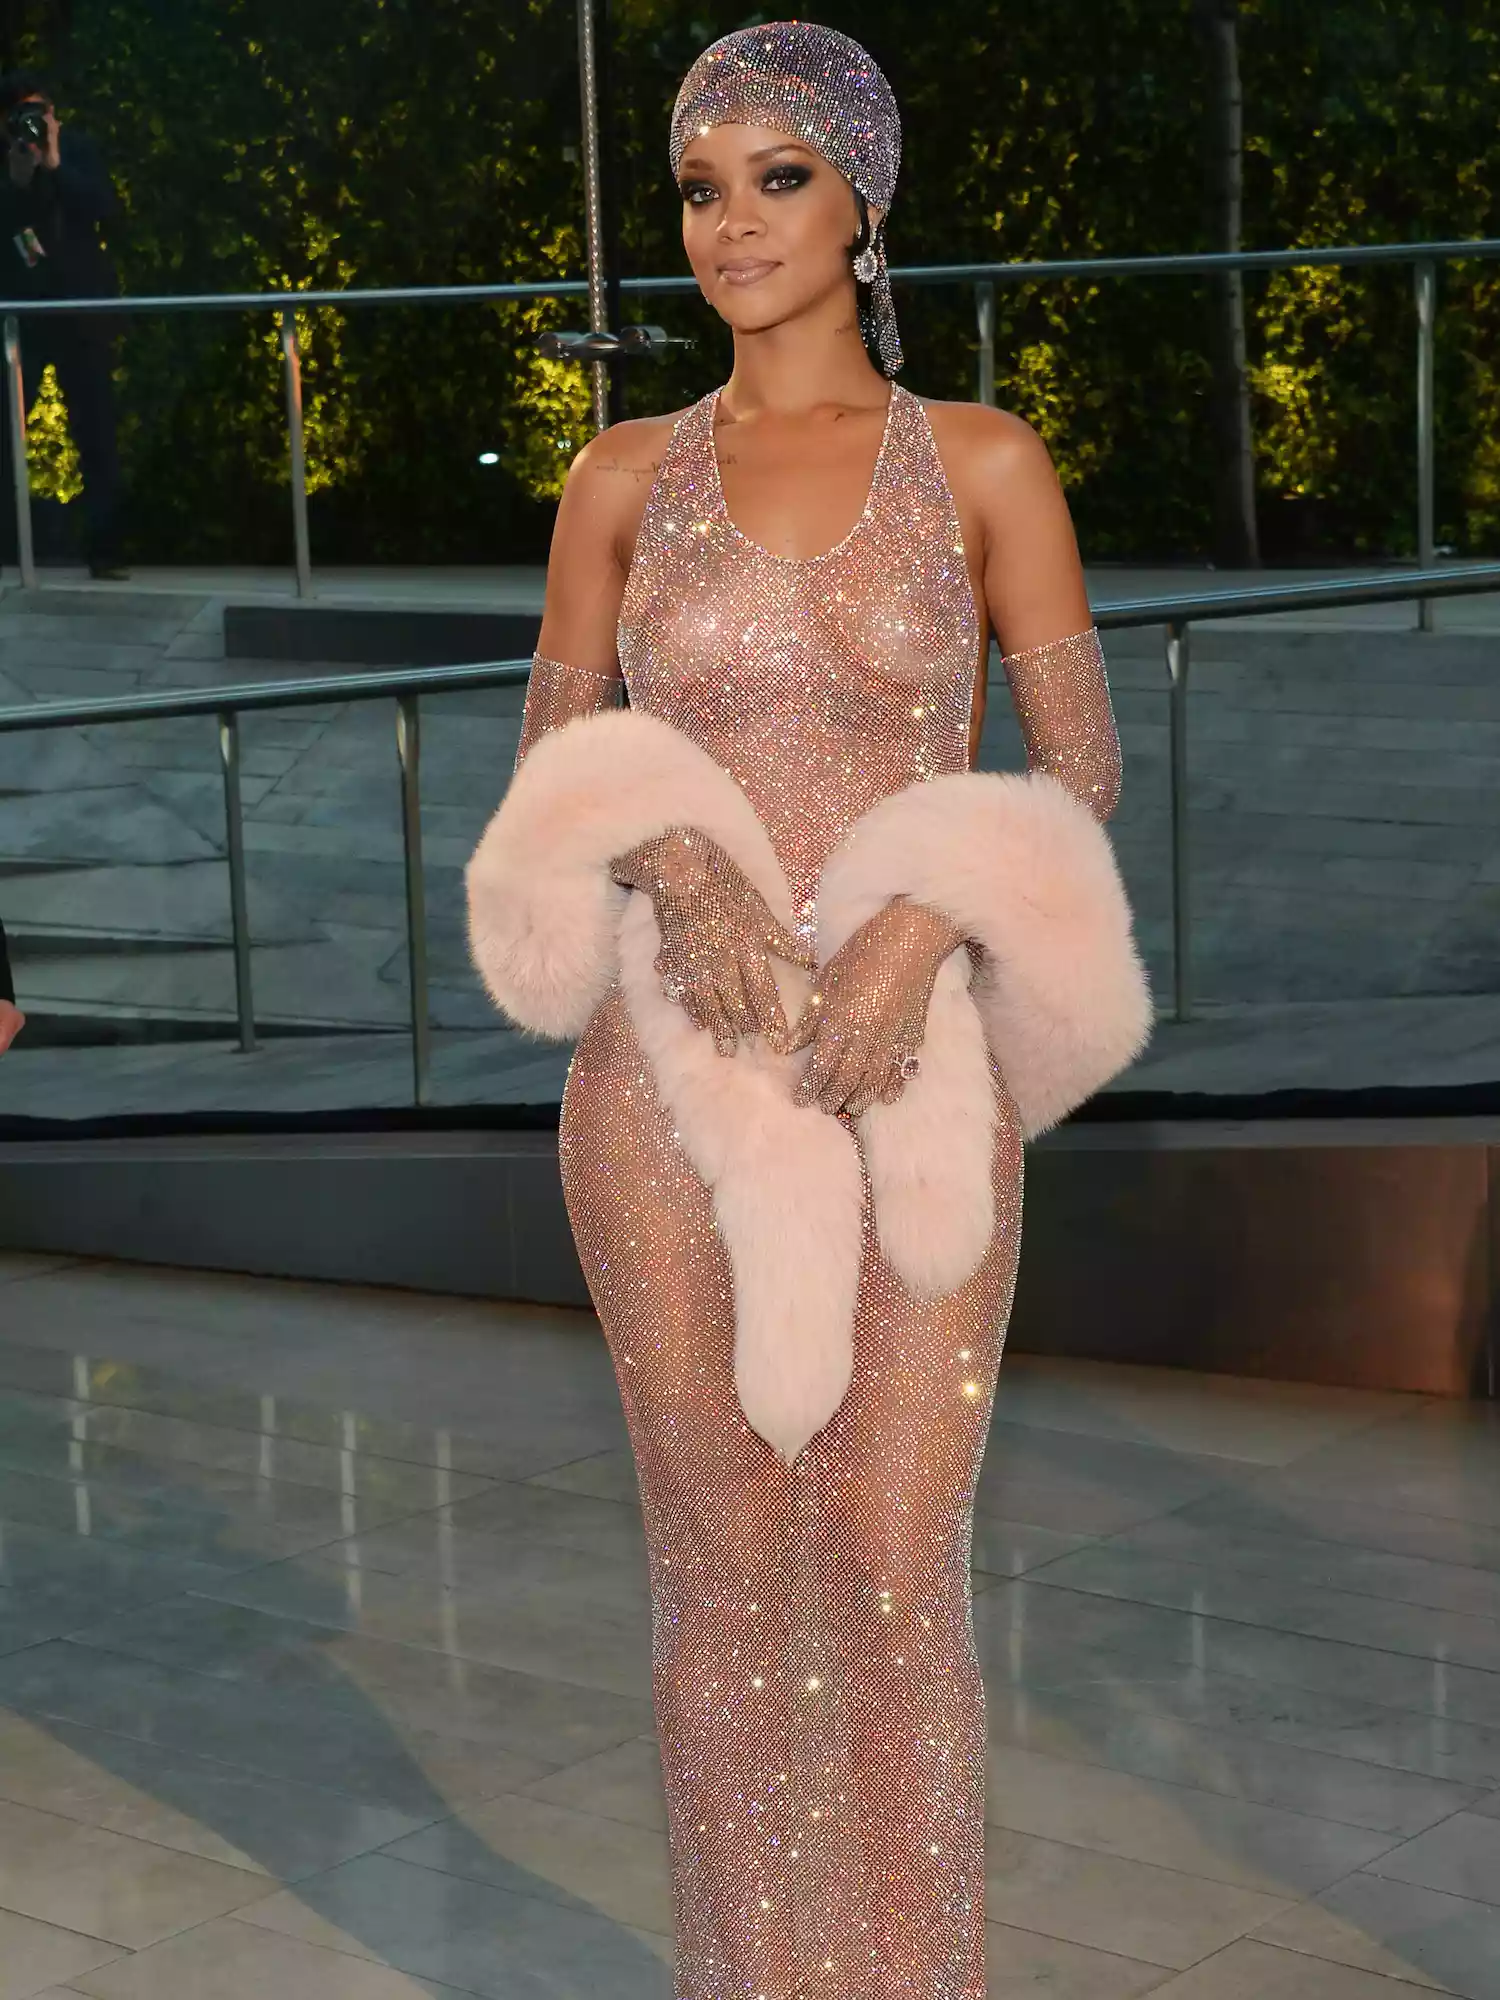 Rihanna wears a sheer Adam Selman gown with Swarovski crystals to the 2014 CFDA Awards